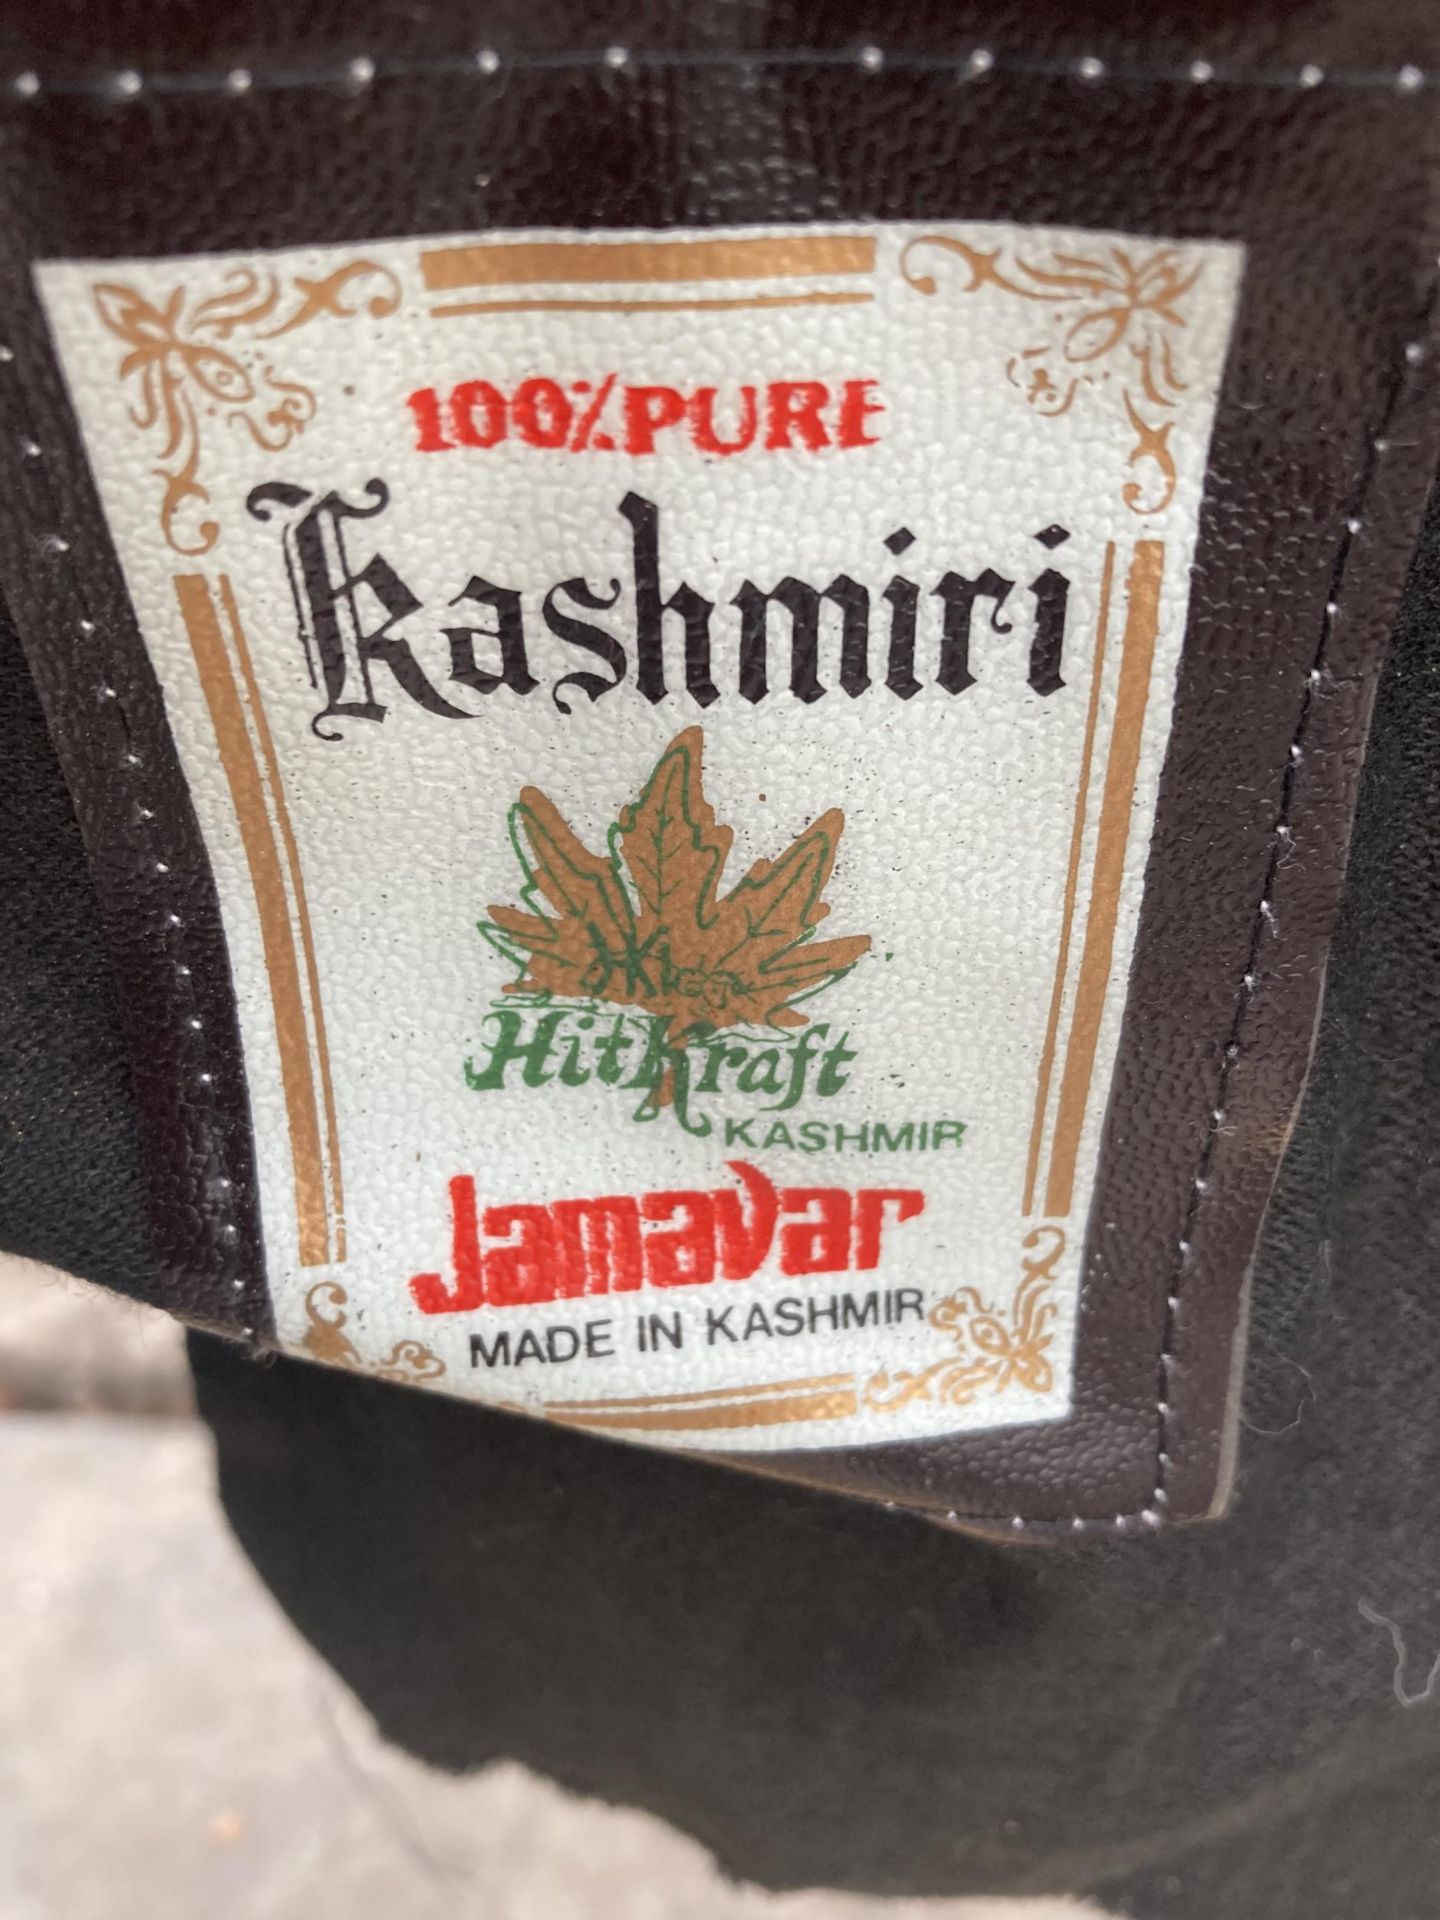 A 100% KASHMIRI PIECE OF MATERIAL - Image 2 of 2